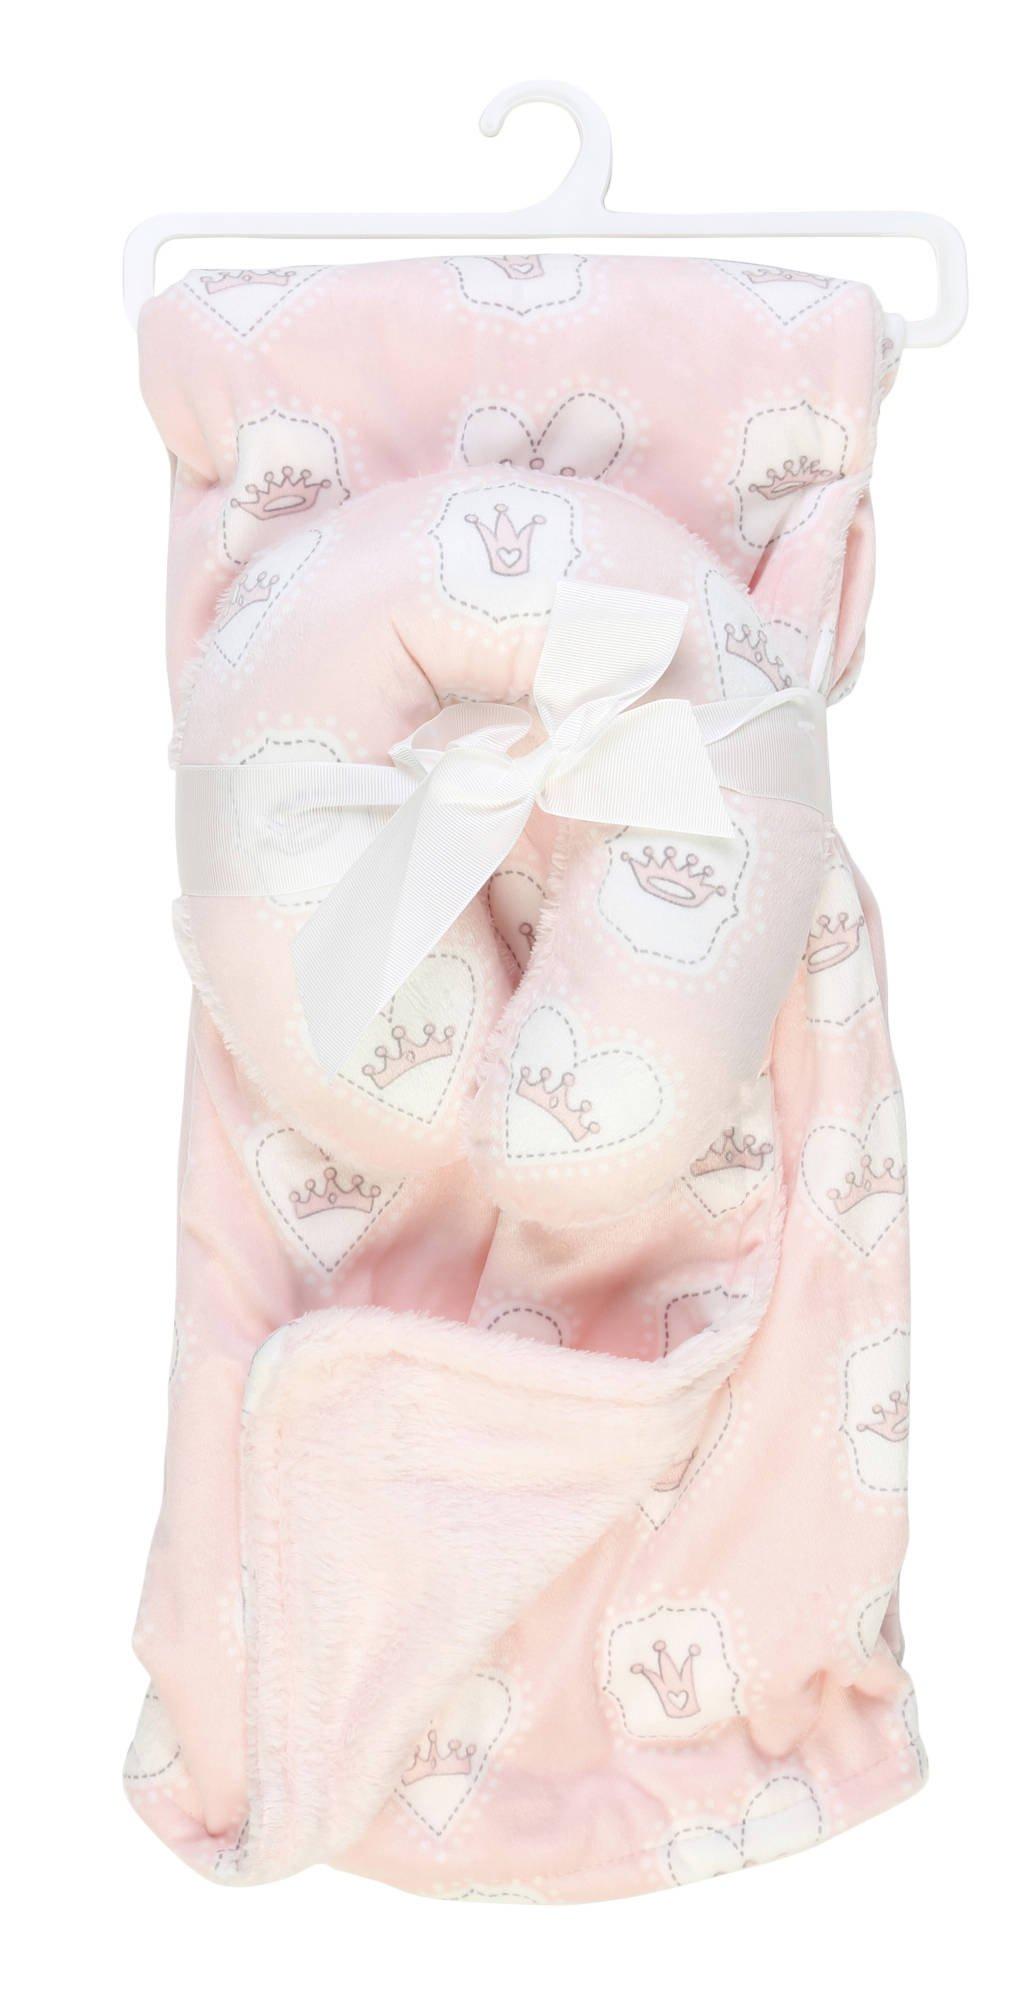 baby blanket with neck pillow